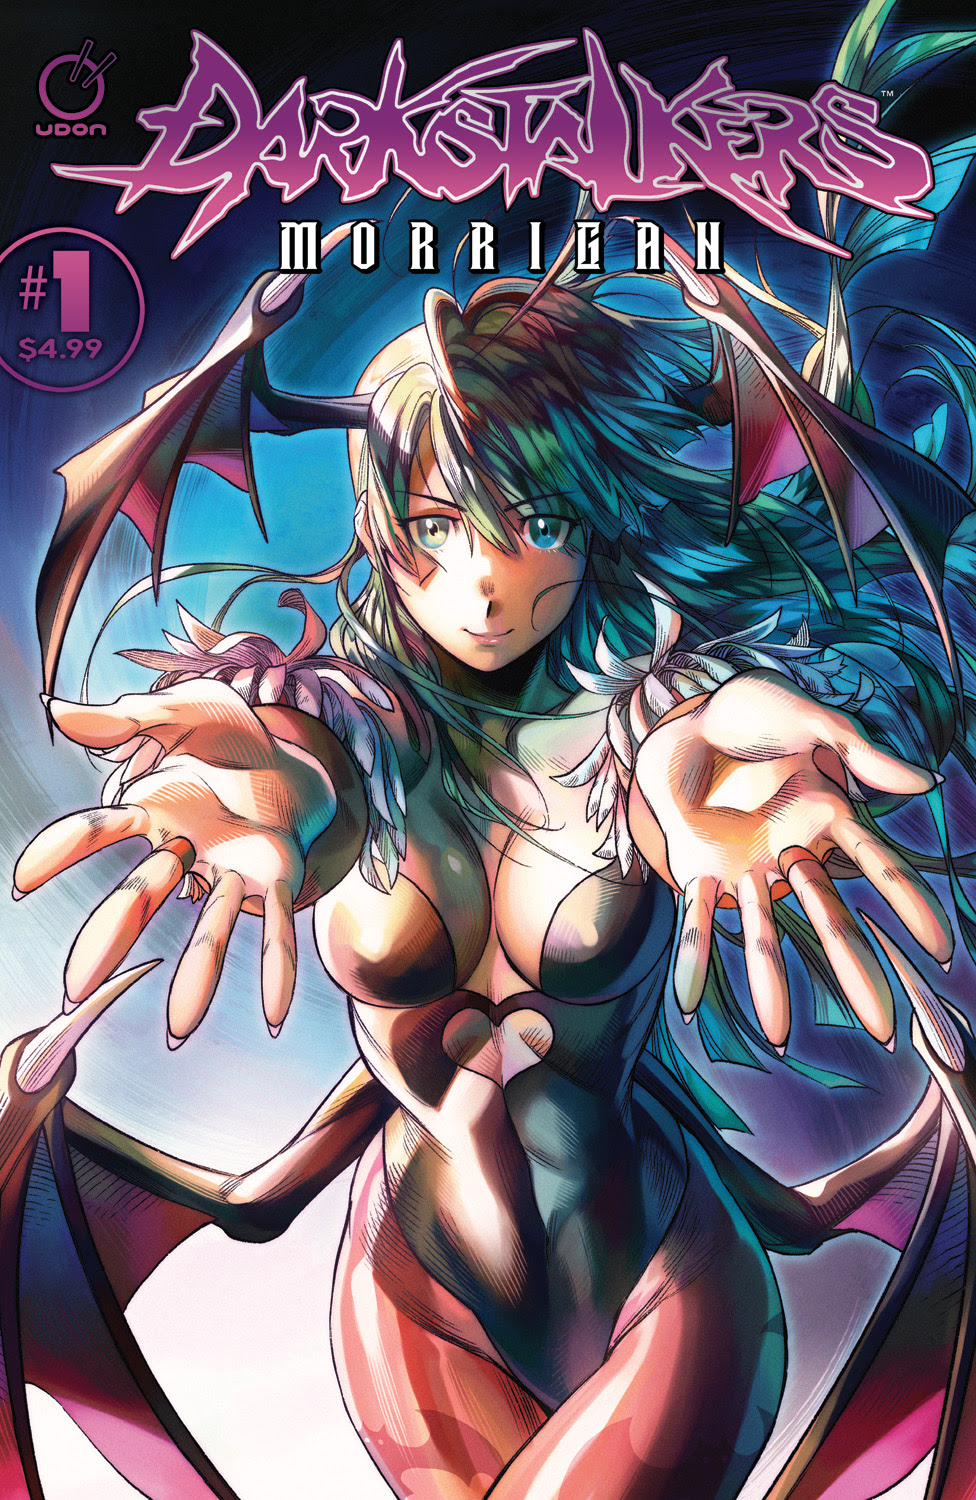 Darkstalkers Morrigan Comic First Issue Will Debut in March 2022